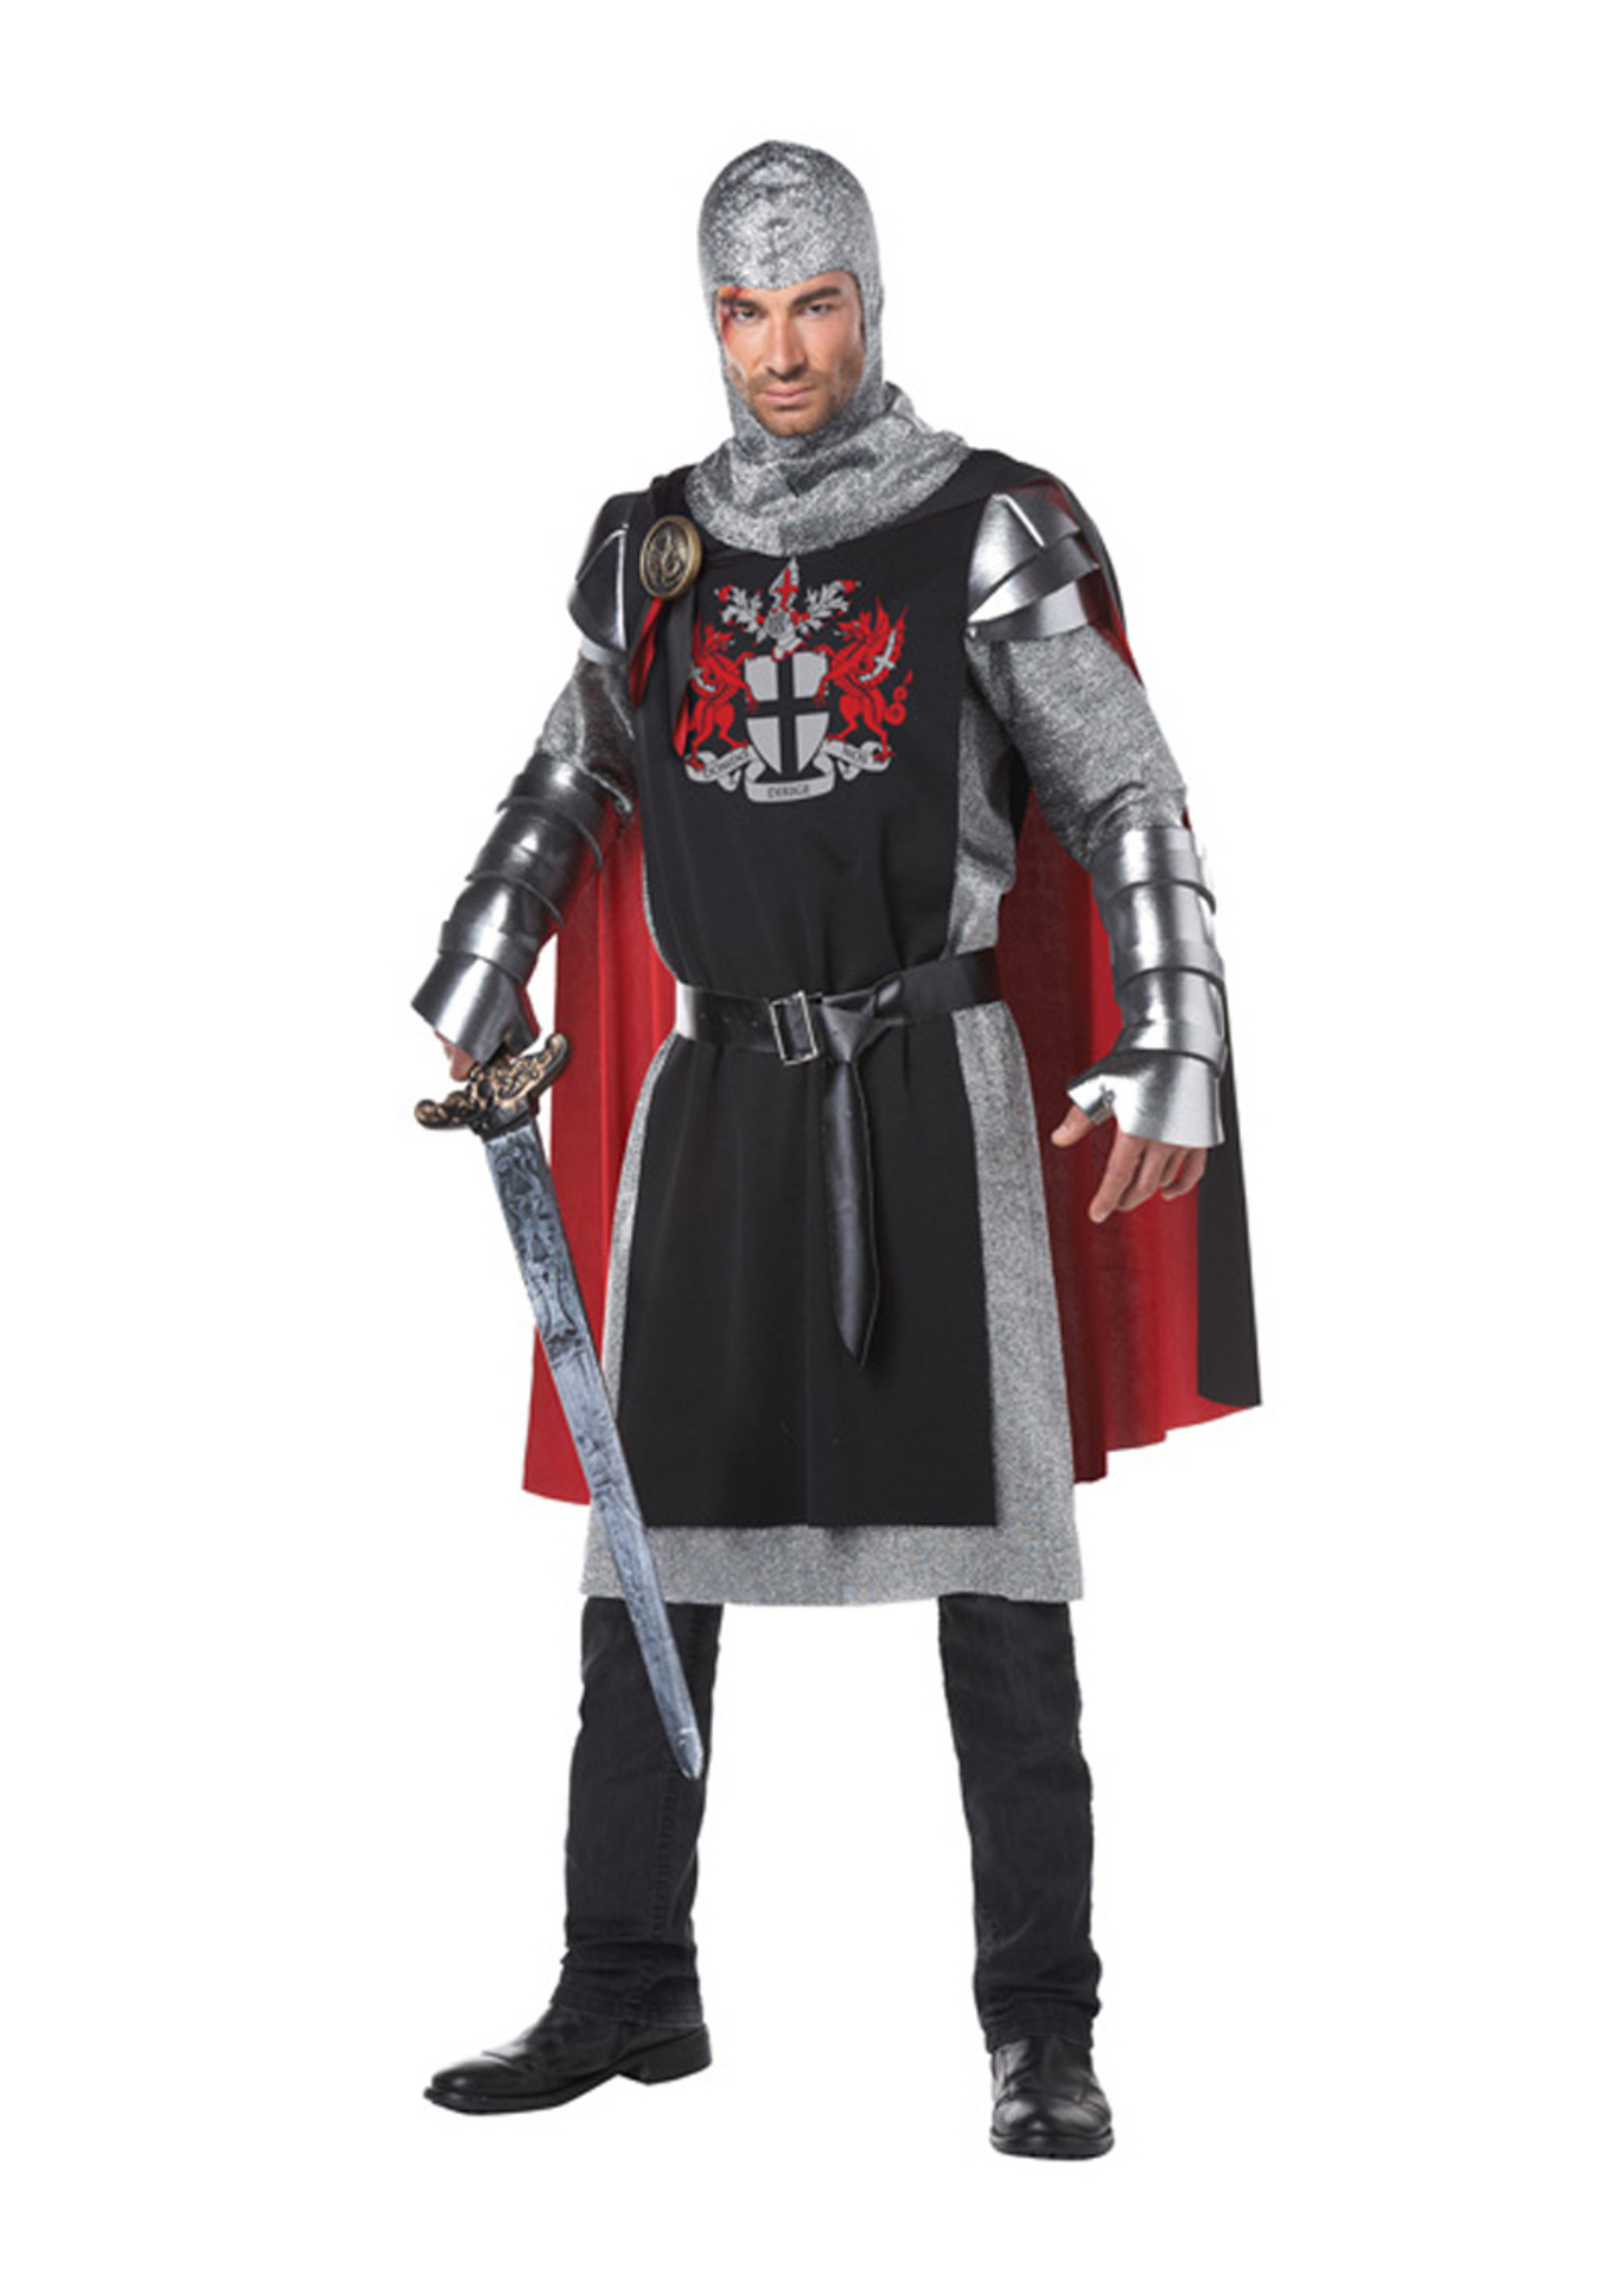 Knight Costume - Men's - Party